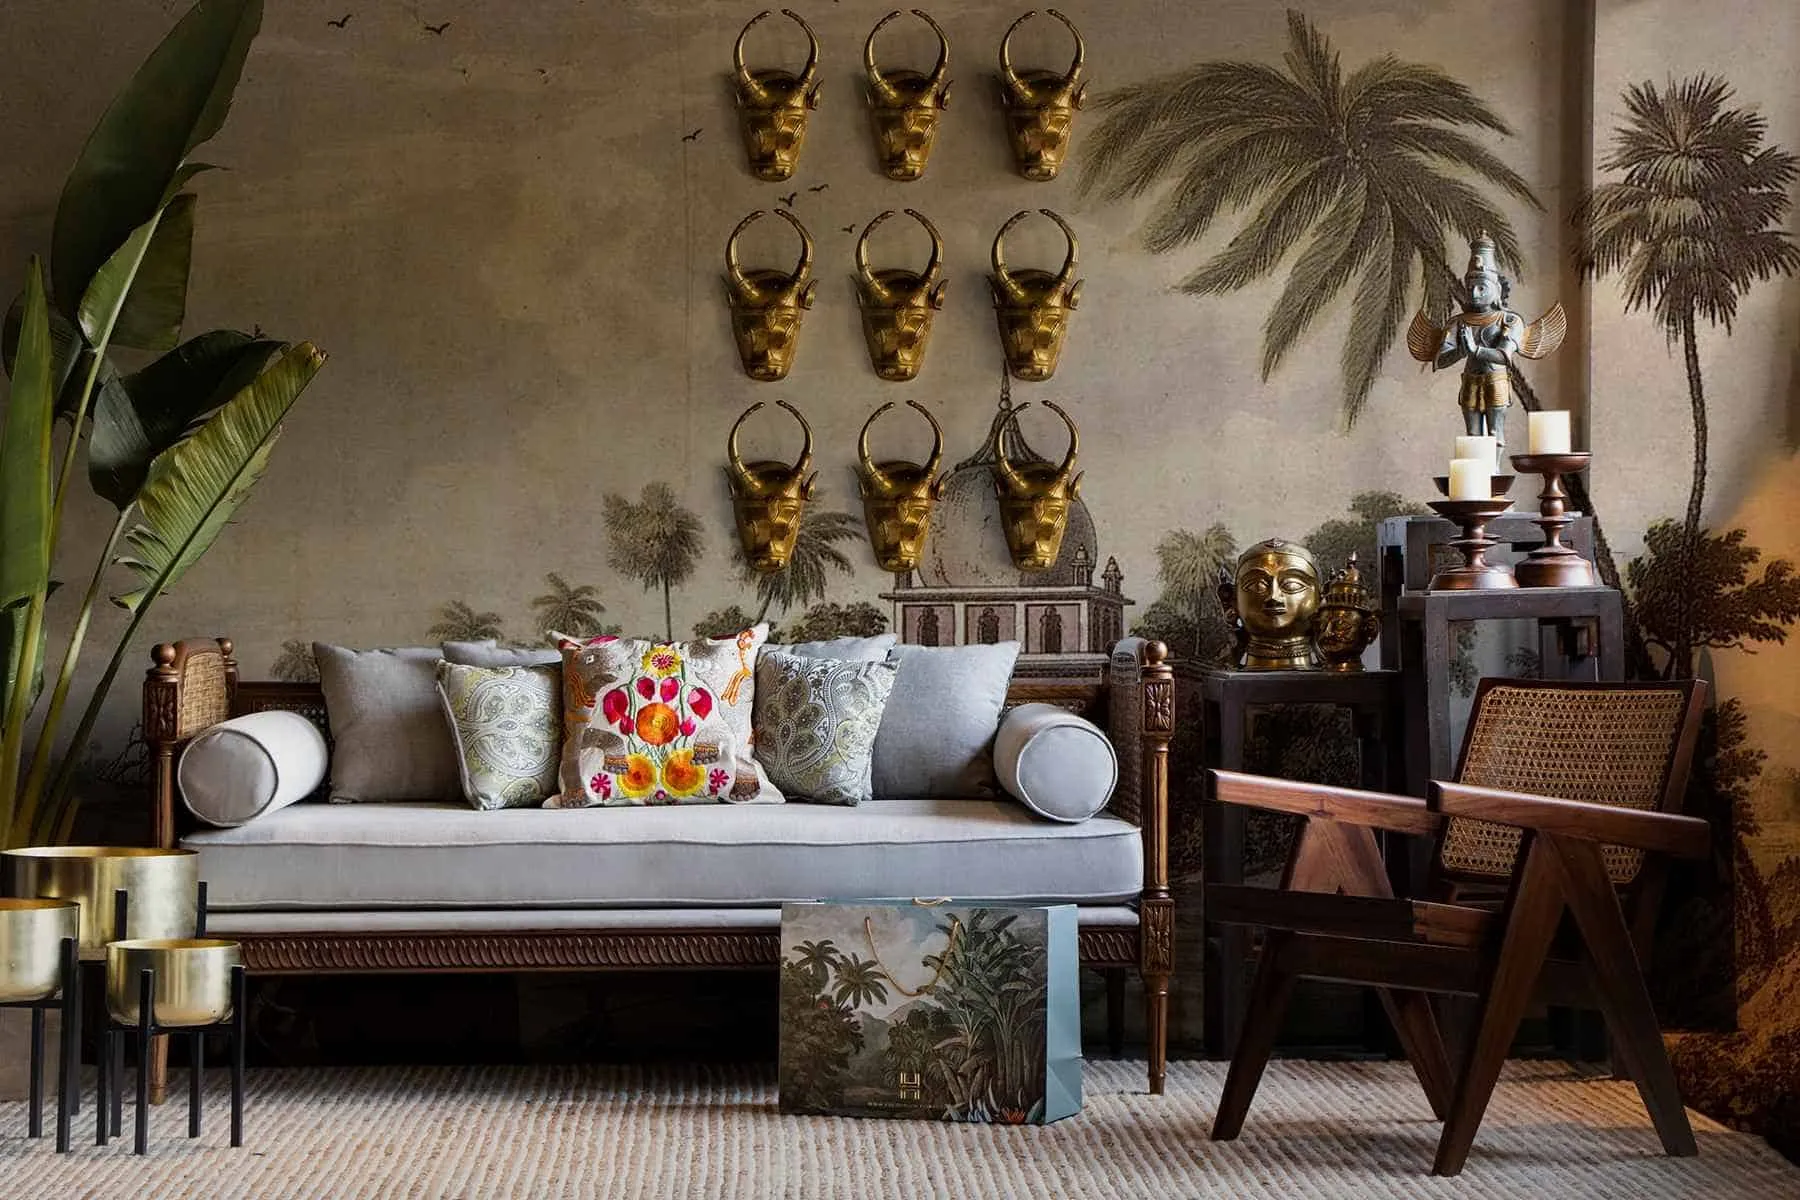 brown interiors of a living room with light blue sofa, plants and eccentric wall hanging art